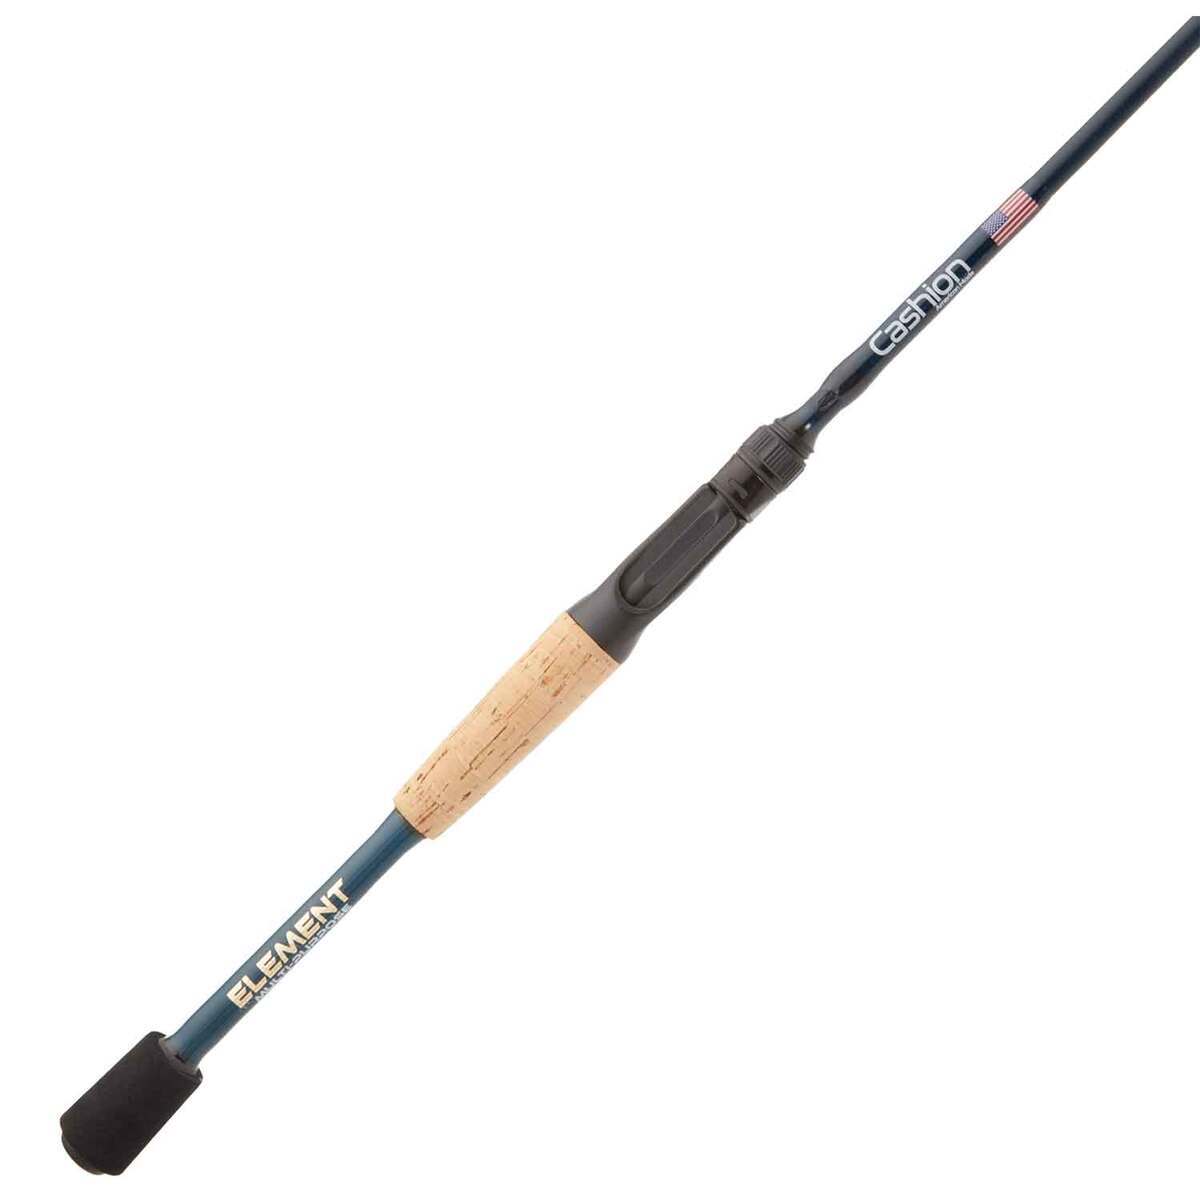 Cashion Fishing Rods Element Multi-Purpose Casting Rod - 7ft 1in, Medium  Heavy Power, Moderate Fast Action, 1pc